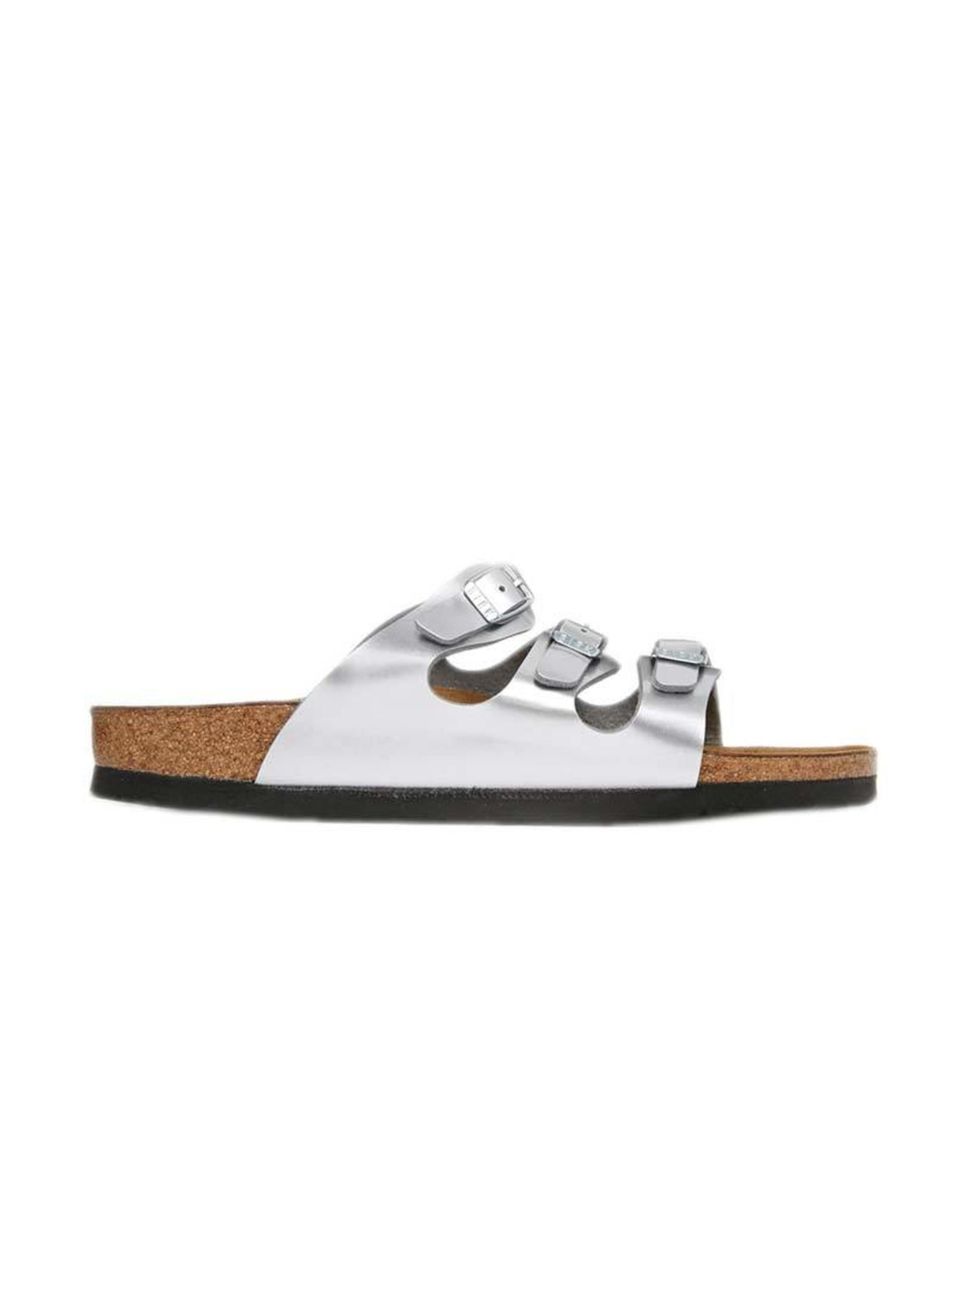 <p>Acting Features Assistant Maybelle Morgan is refusing to don winter boots just yet...</p>

<p>&nbsp;</p>

<p>Birkenstock sandals, &pound;59.50 at <a href="http://www.asos.com/Birkenstock/Birkenstock-Florida-Steel-Silver-Metallic-Flat-Sandals/Prod/pgepr